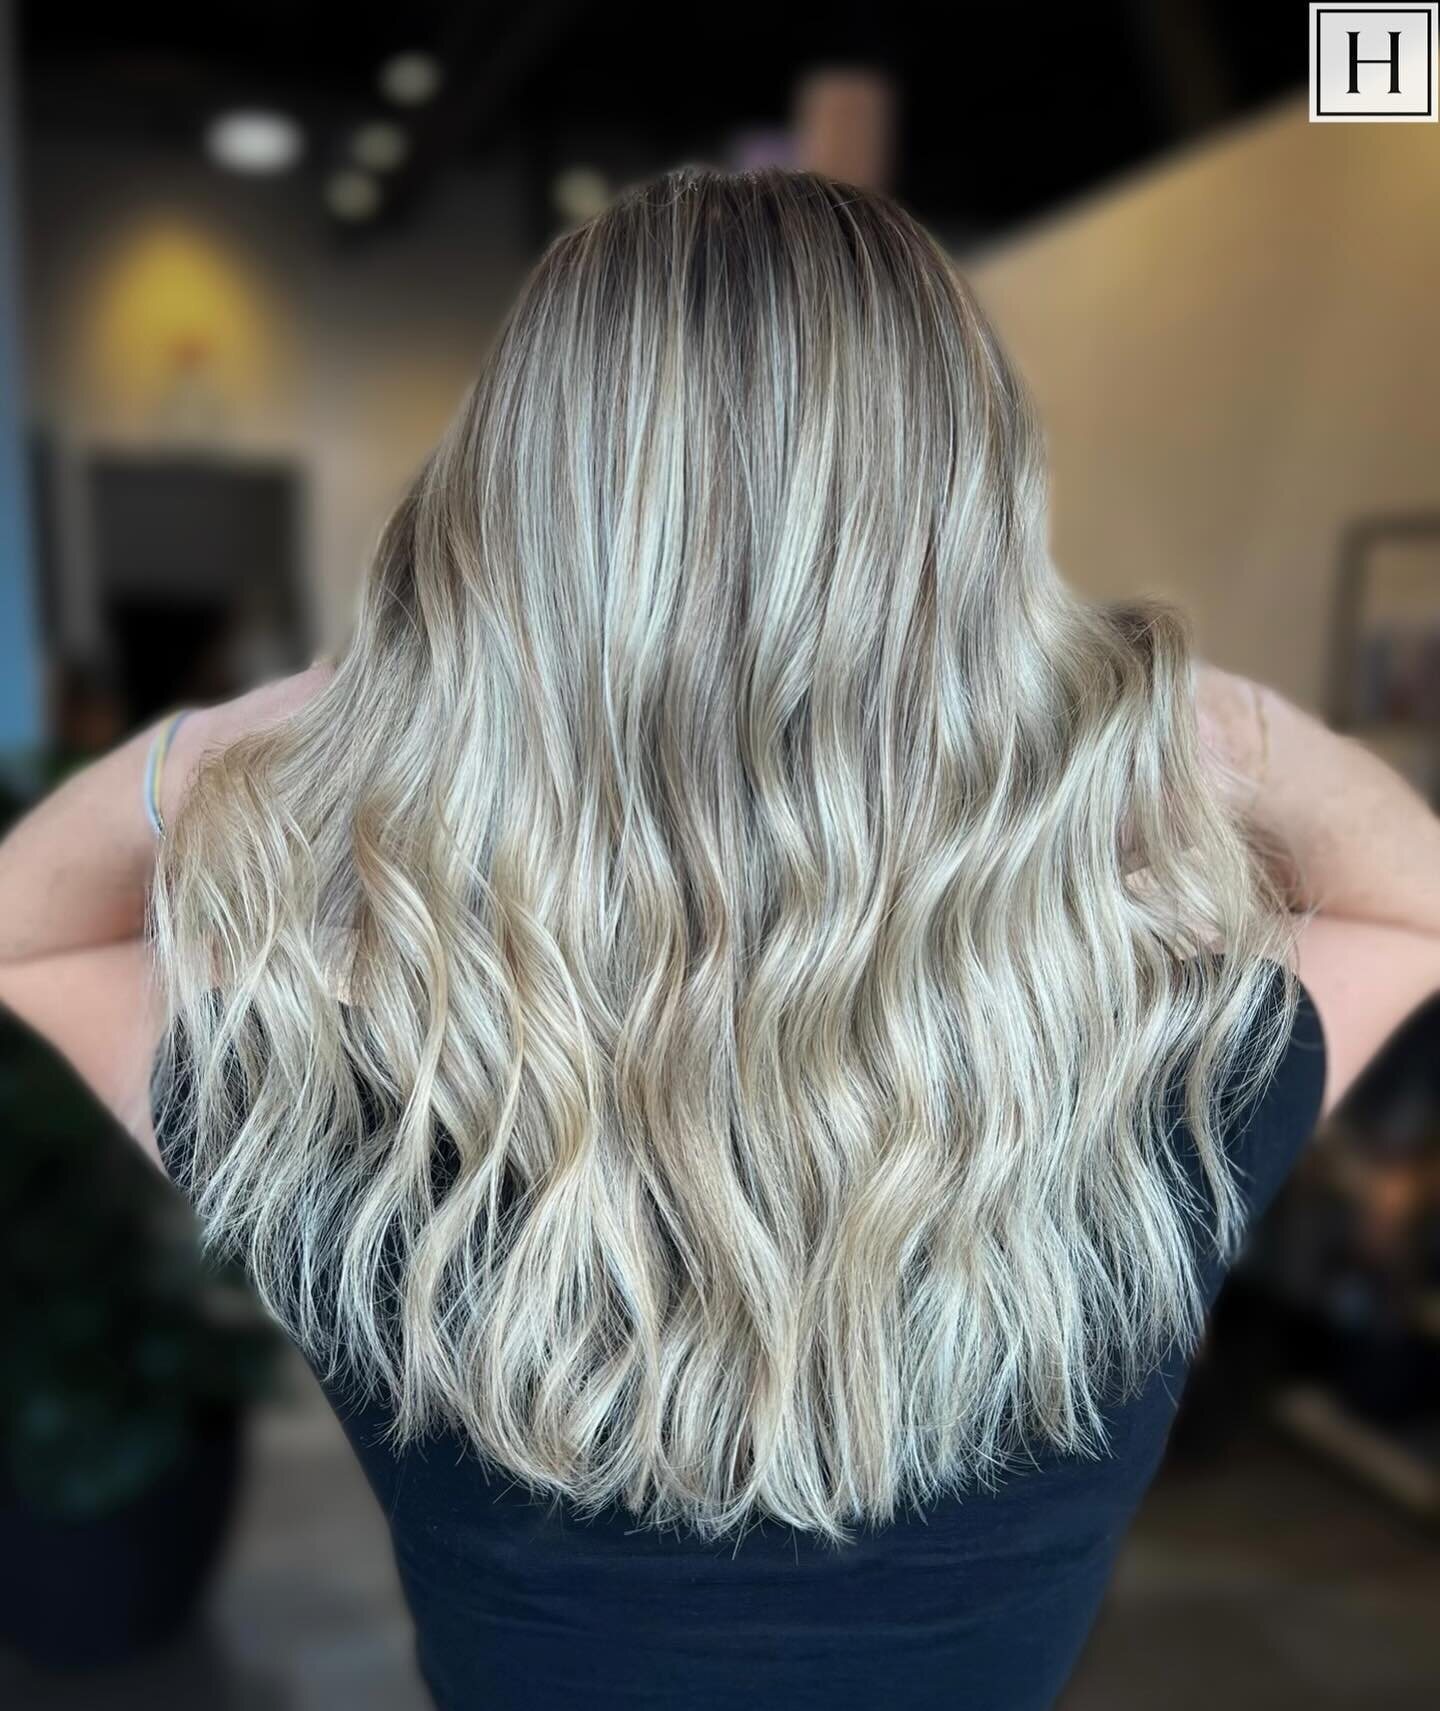 If you want hair like this, book an appointment with @_hairbychandler__ NOW! 😍

#hair #hairstylist #hairsalon #hydesalon #hydechapin #chapinsc #chapincommons #blonde #lakemurray #lakemurraysc #lakelife #hairappointment